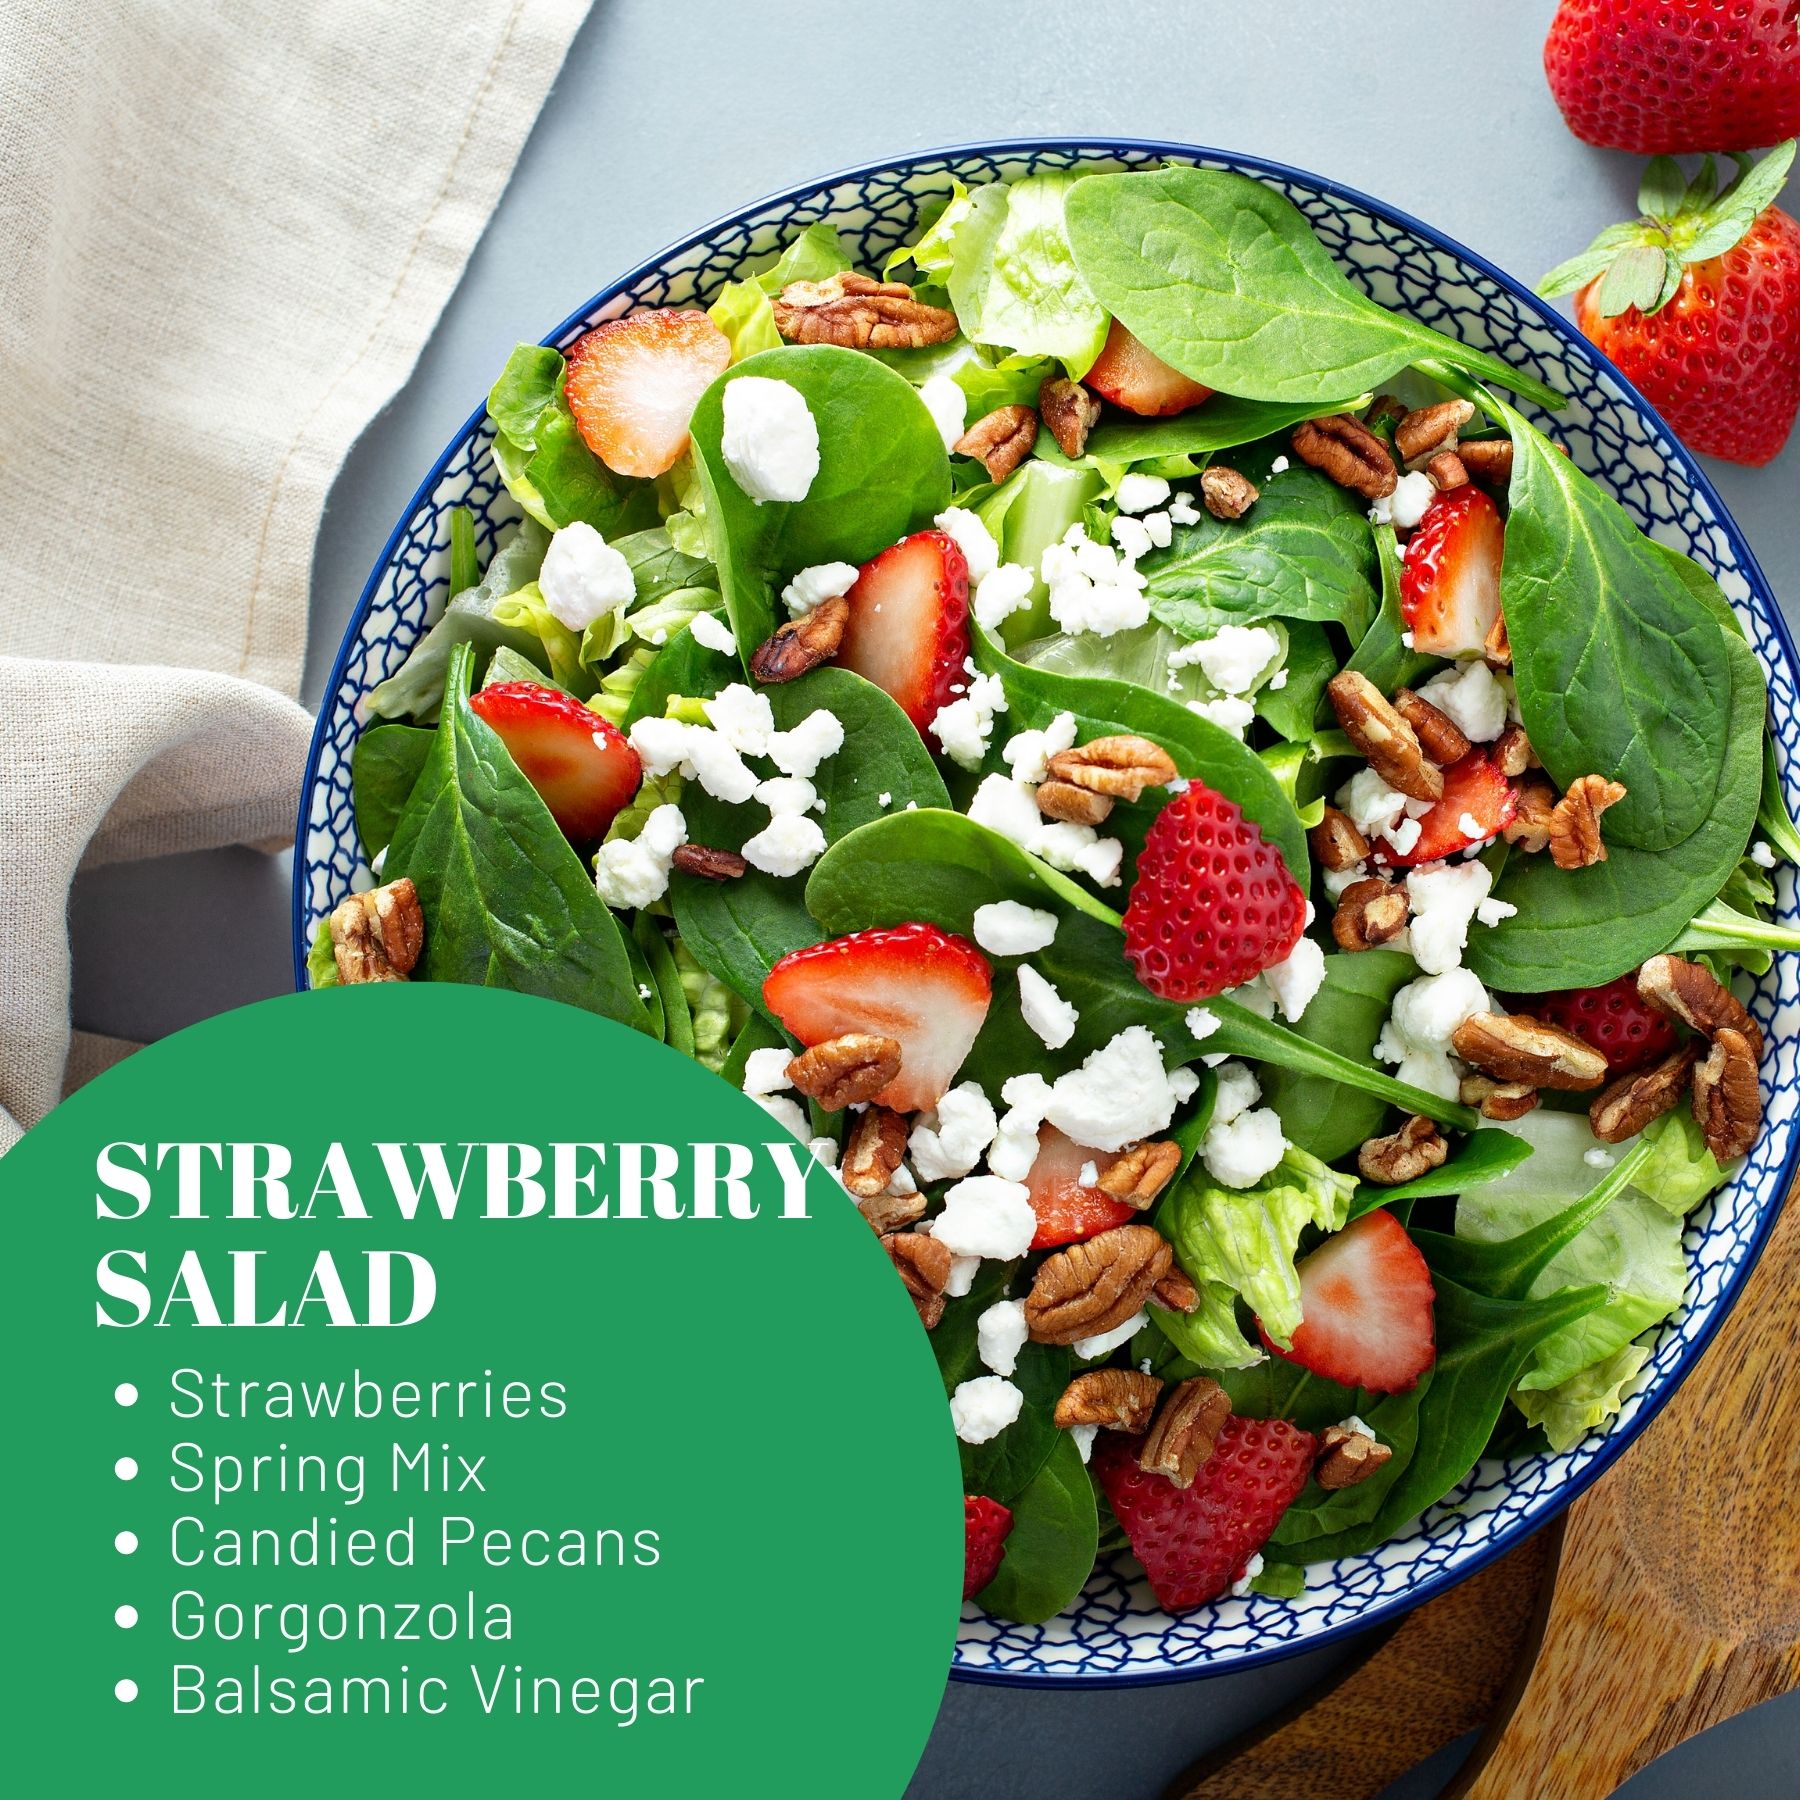 the ingredients for strawberry spring mix salad include strawberries, spring mix, balsamic vinegar, candied pecans, and gorgonzola cheese.